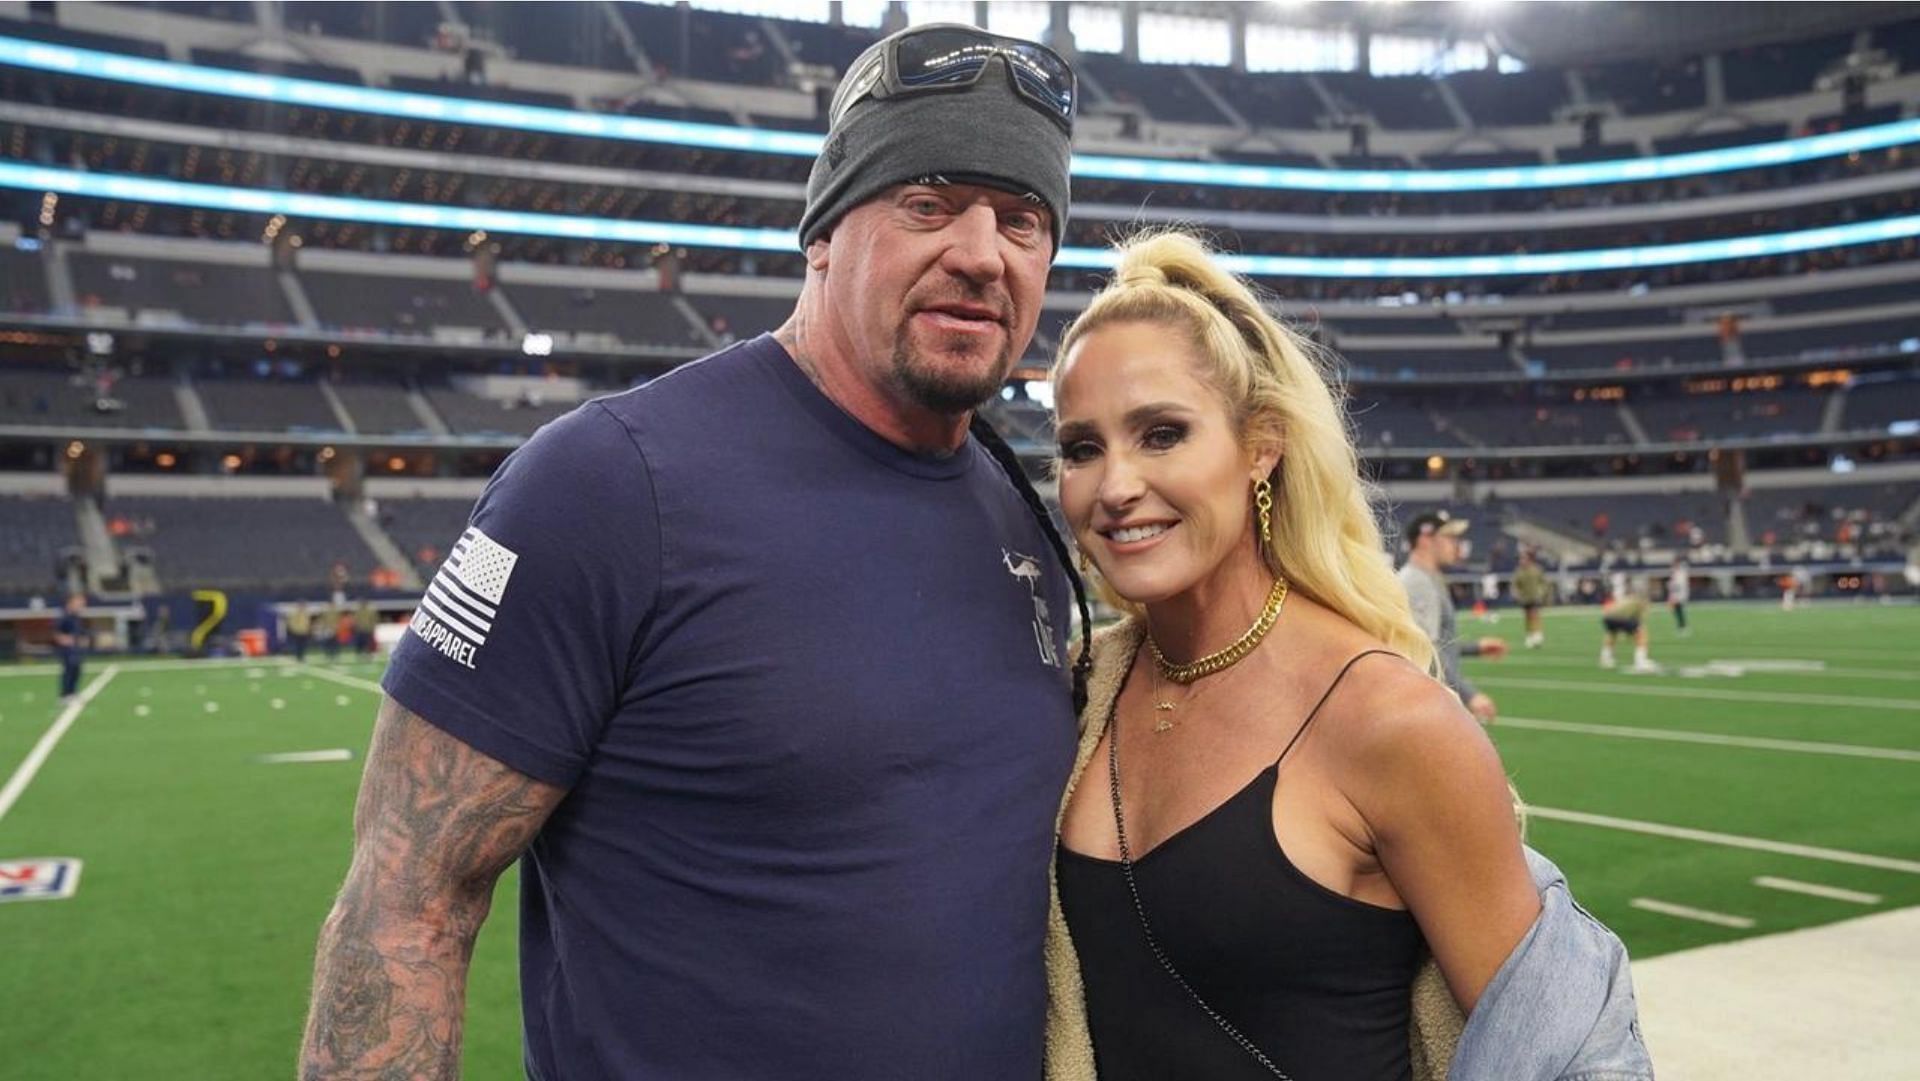 The Undertaker and Michelle McCool at a game